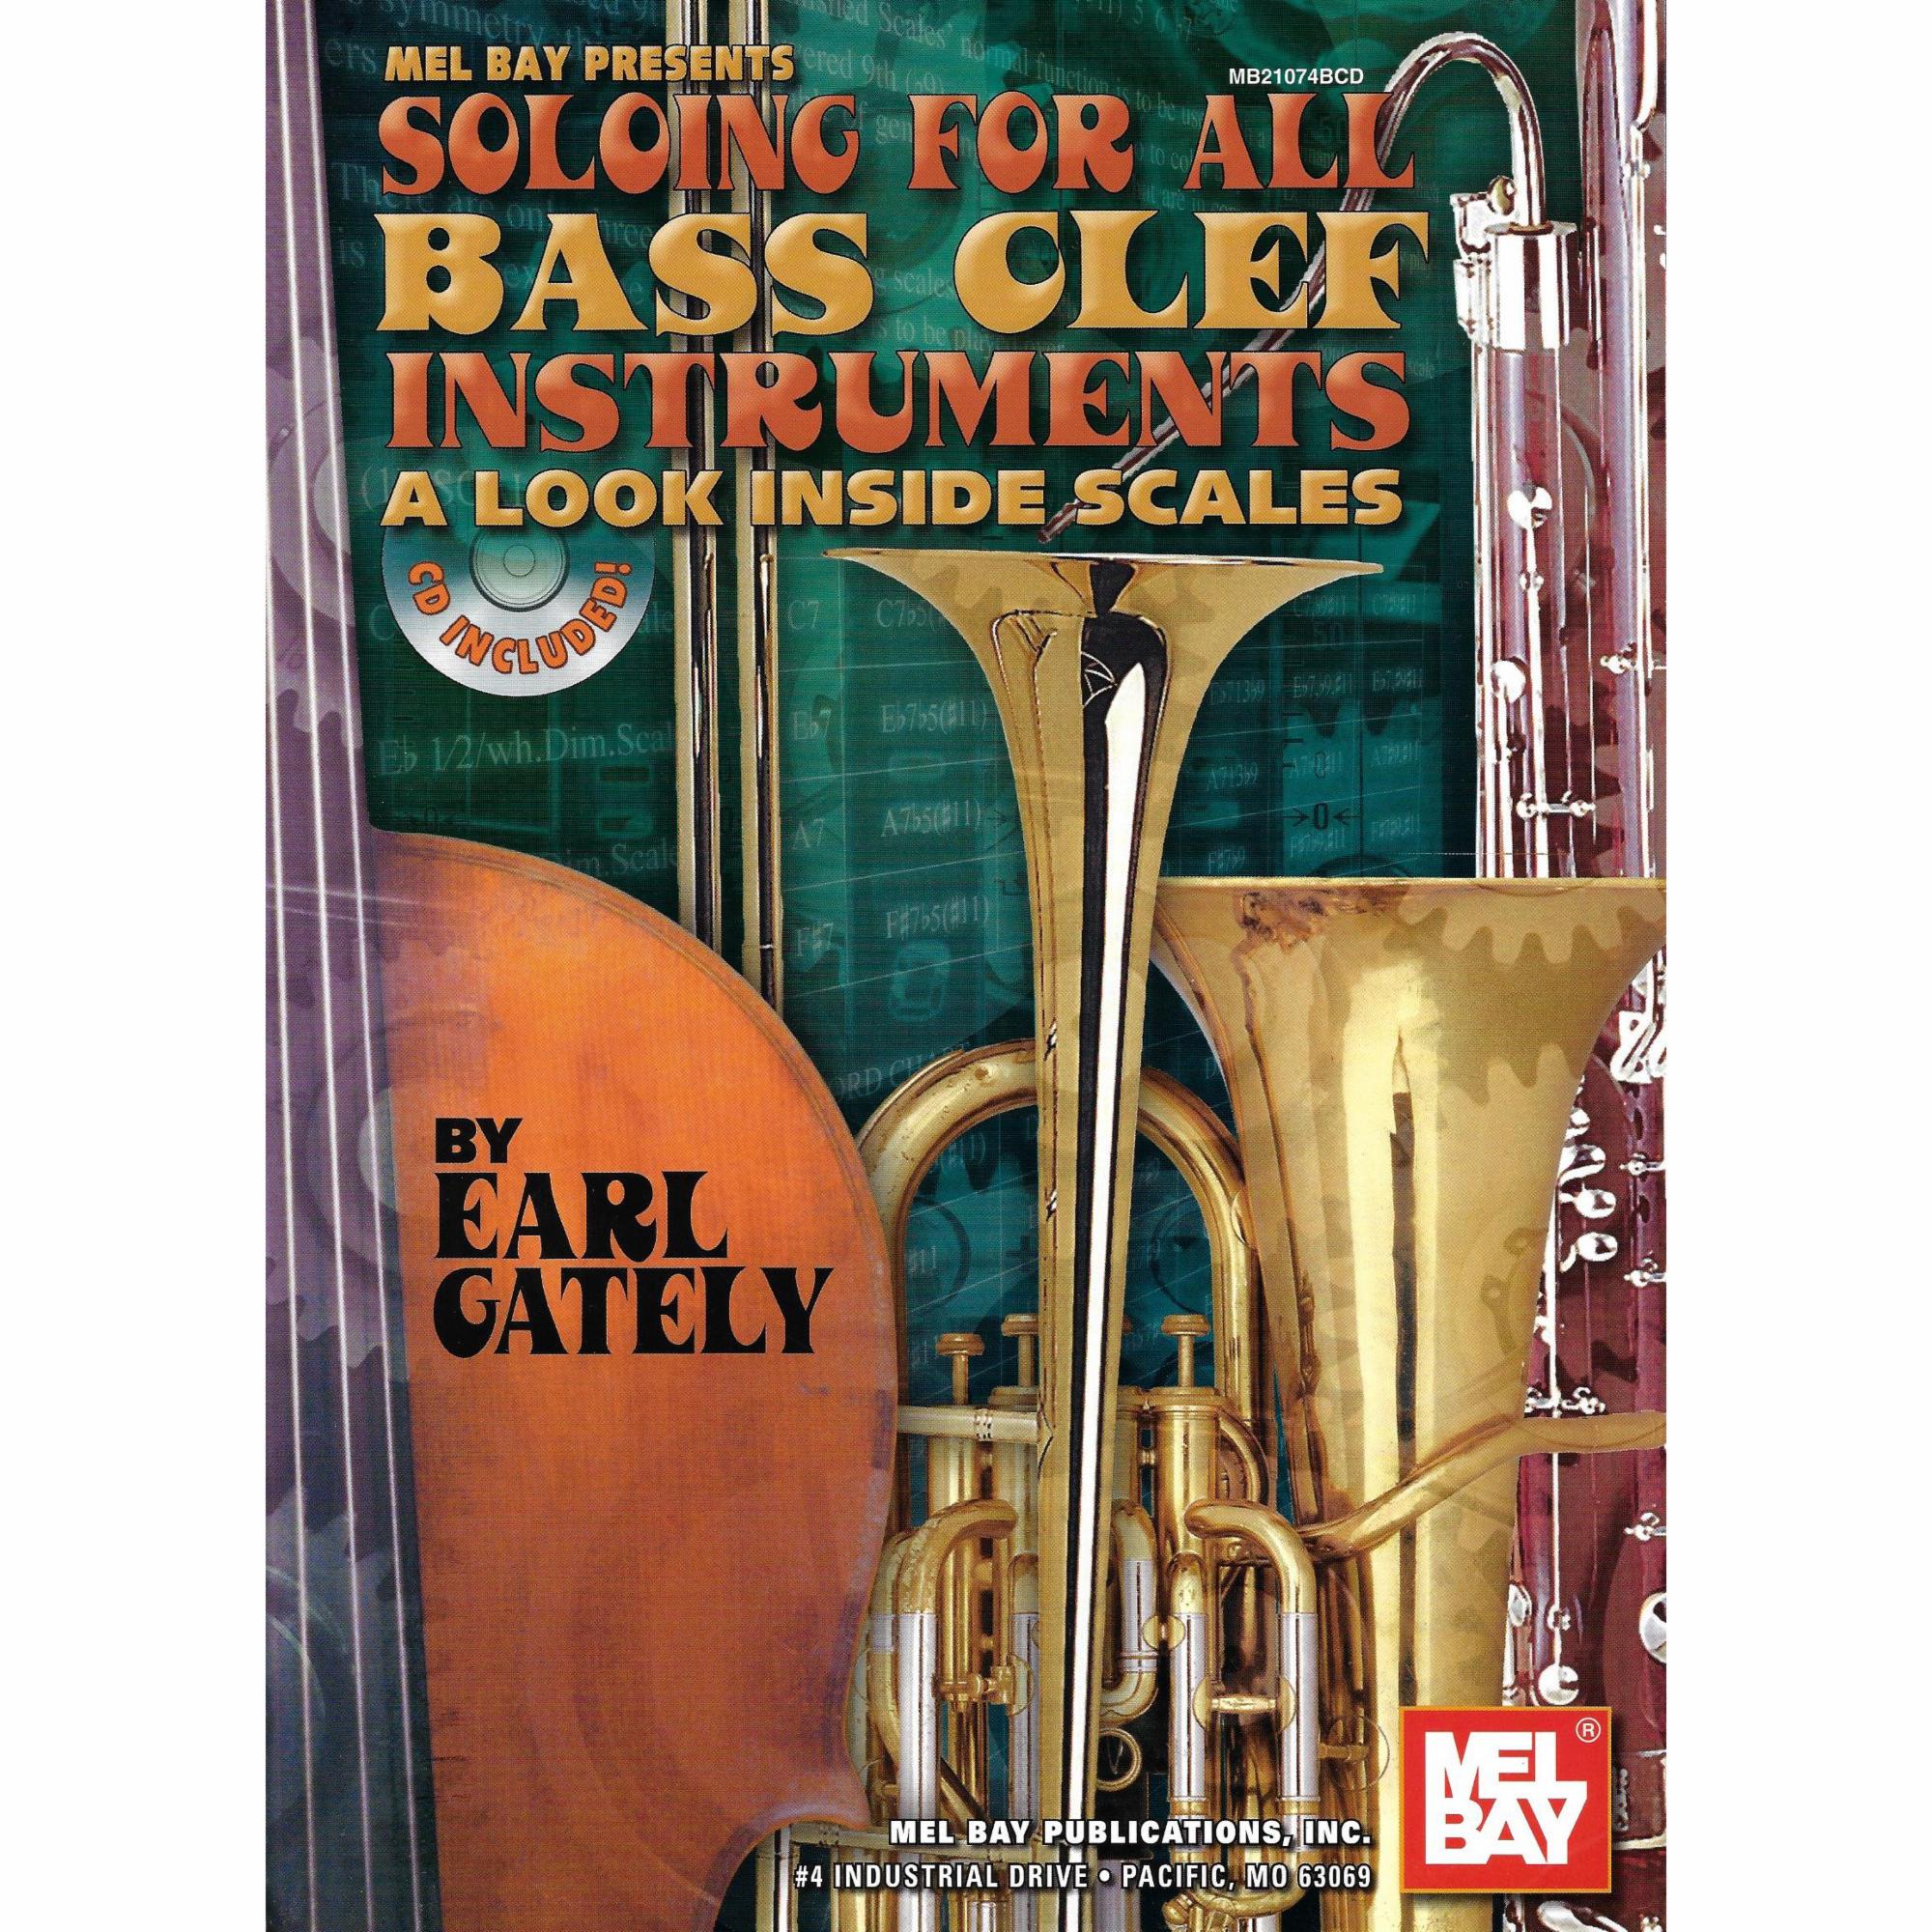 Soloing for All Bass Clef Instruments